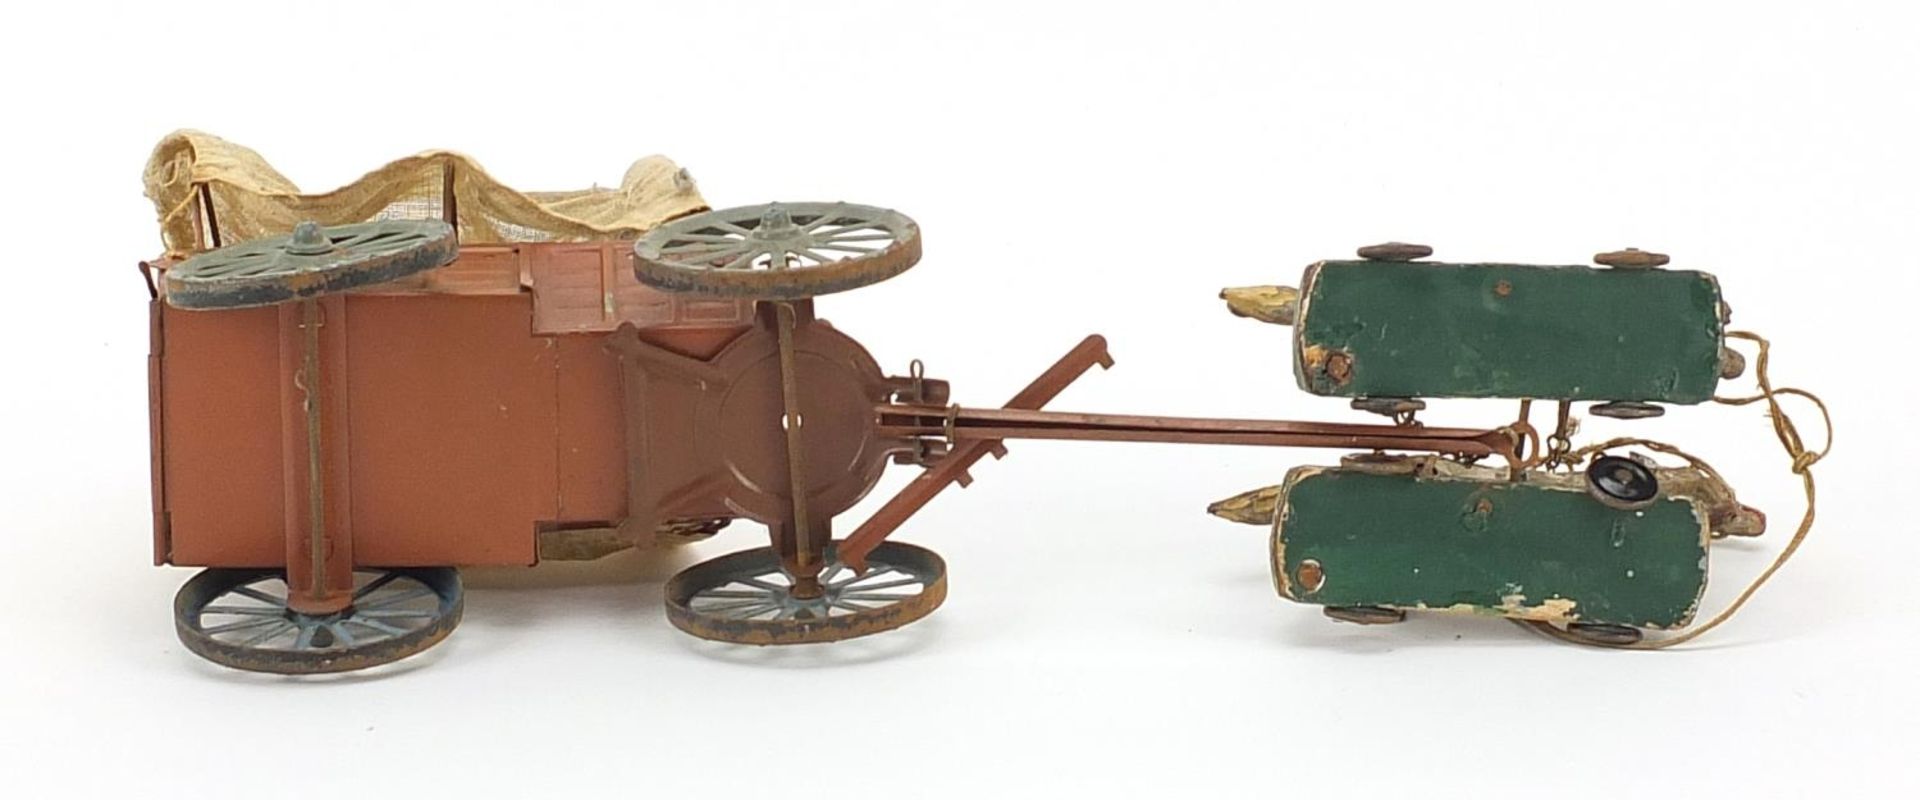 Vintage tinplate wagon with horses, 36cm in length - Image 3 of 3